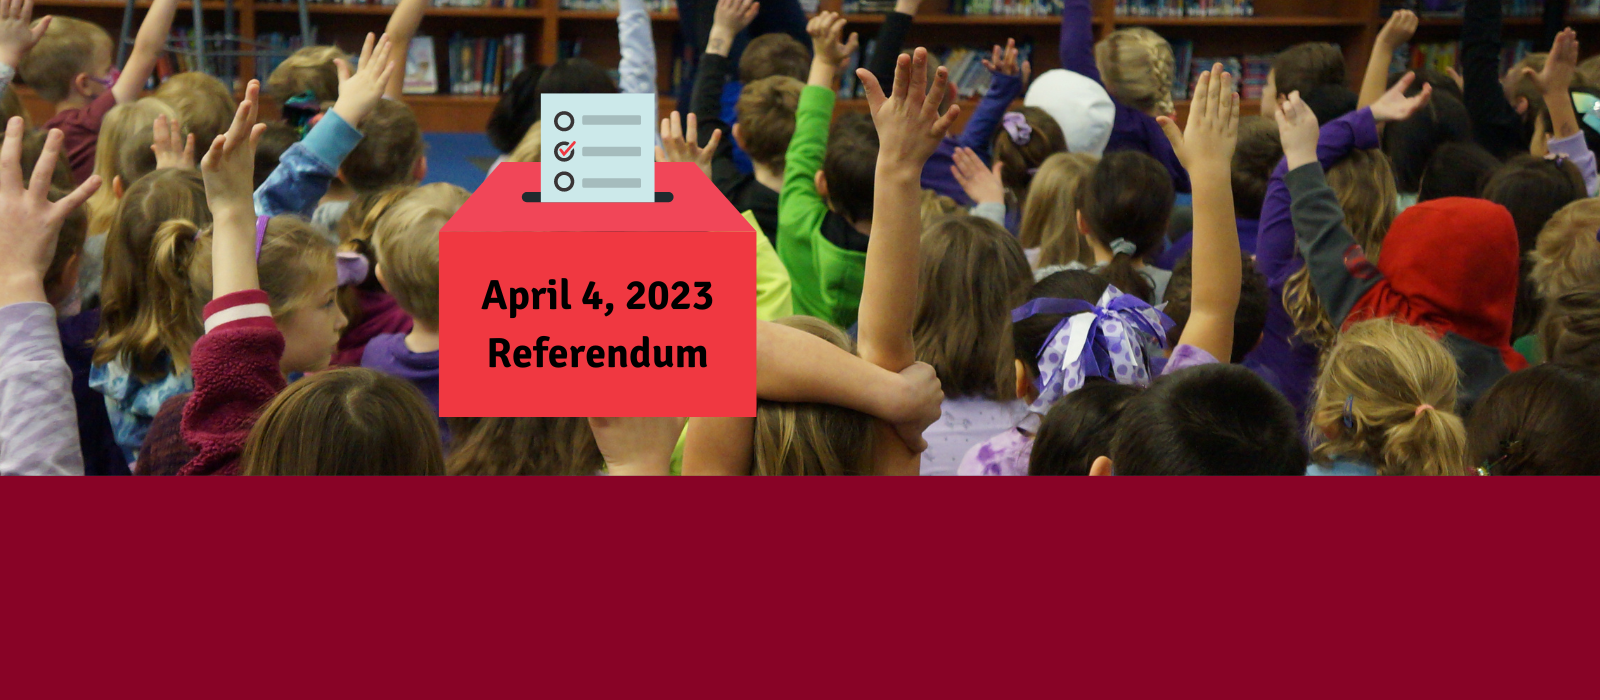 <h2>Referendum Information</h2>
<p>Stay up-to-date with the referendum discussion.</p>
<a href="https://www.bps101.net/referendum" class="button ">Details Here</a>
